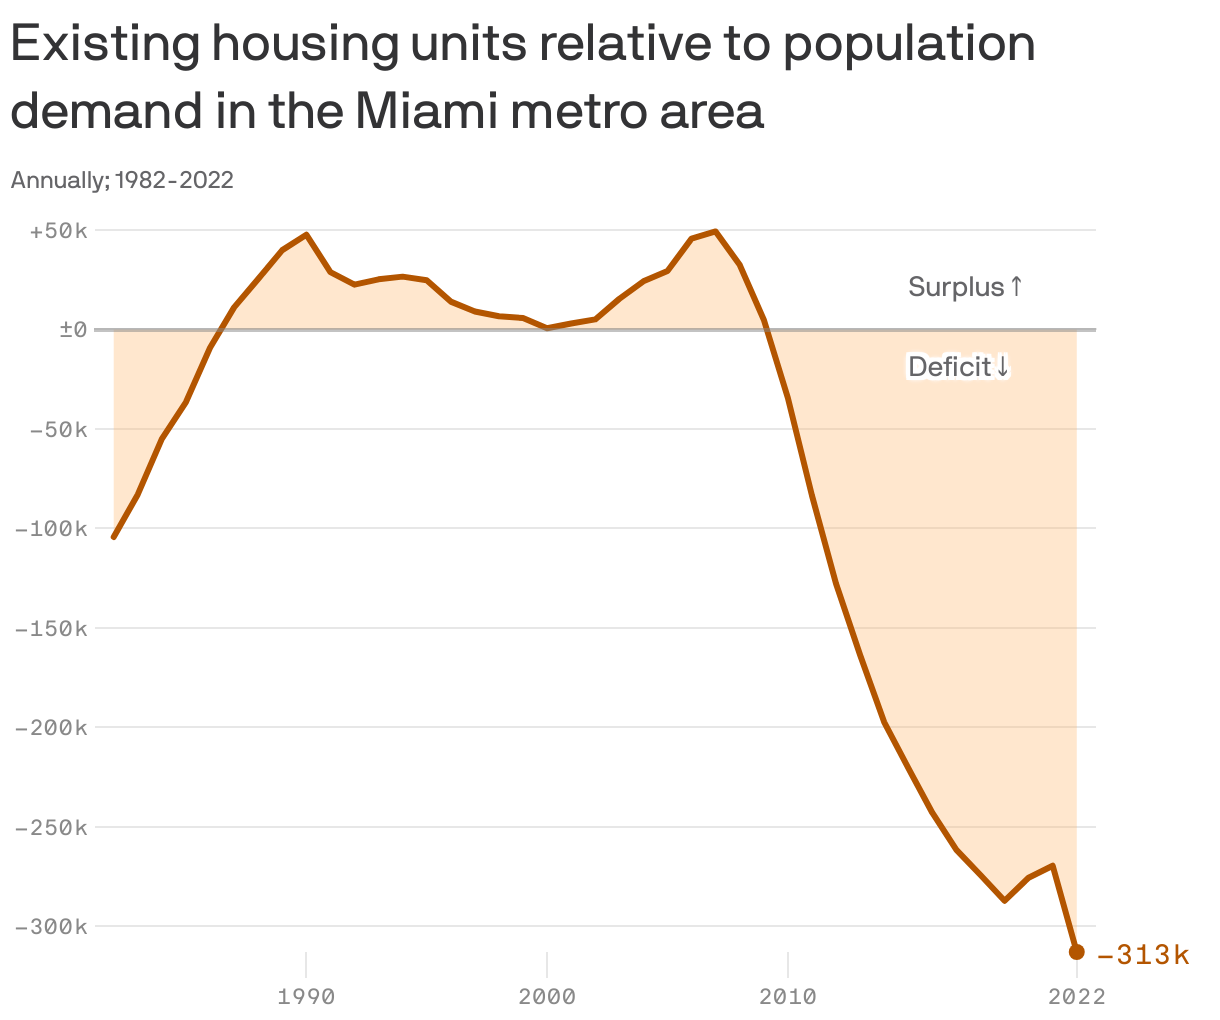 Existing housing units relative to population demand in the Miami metro area